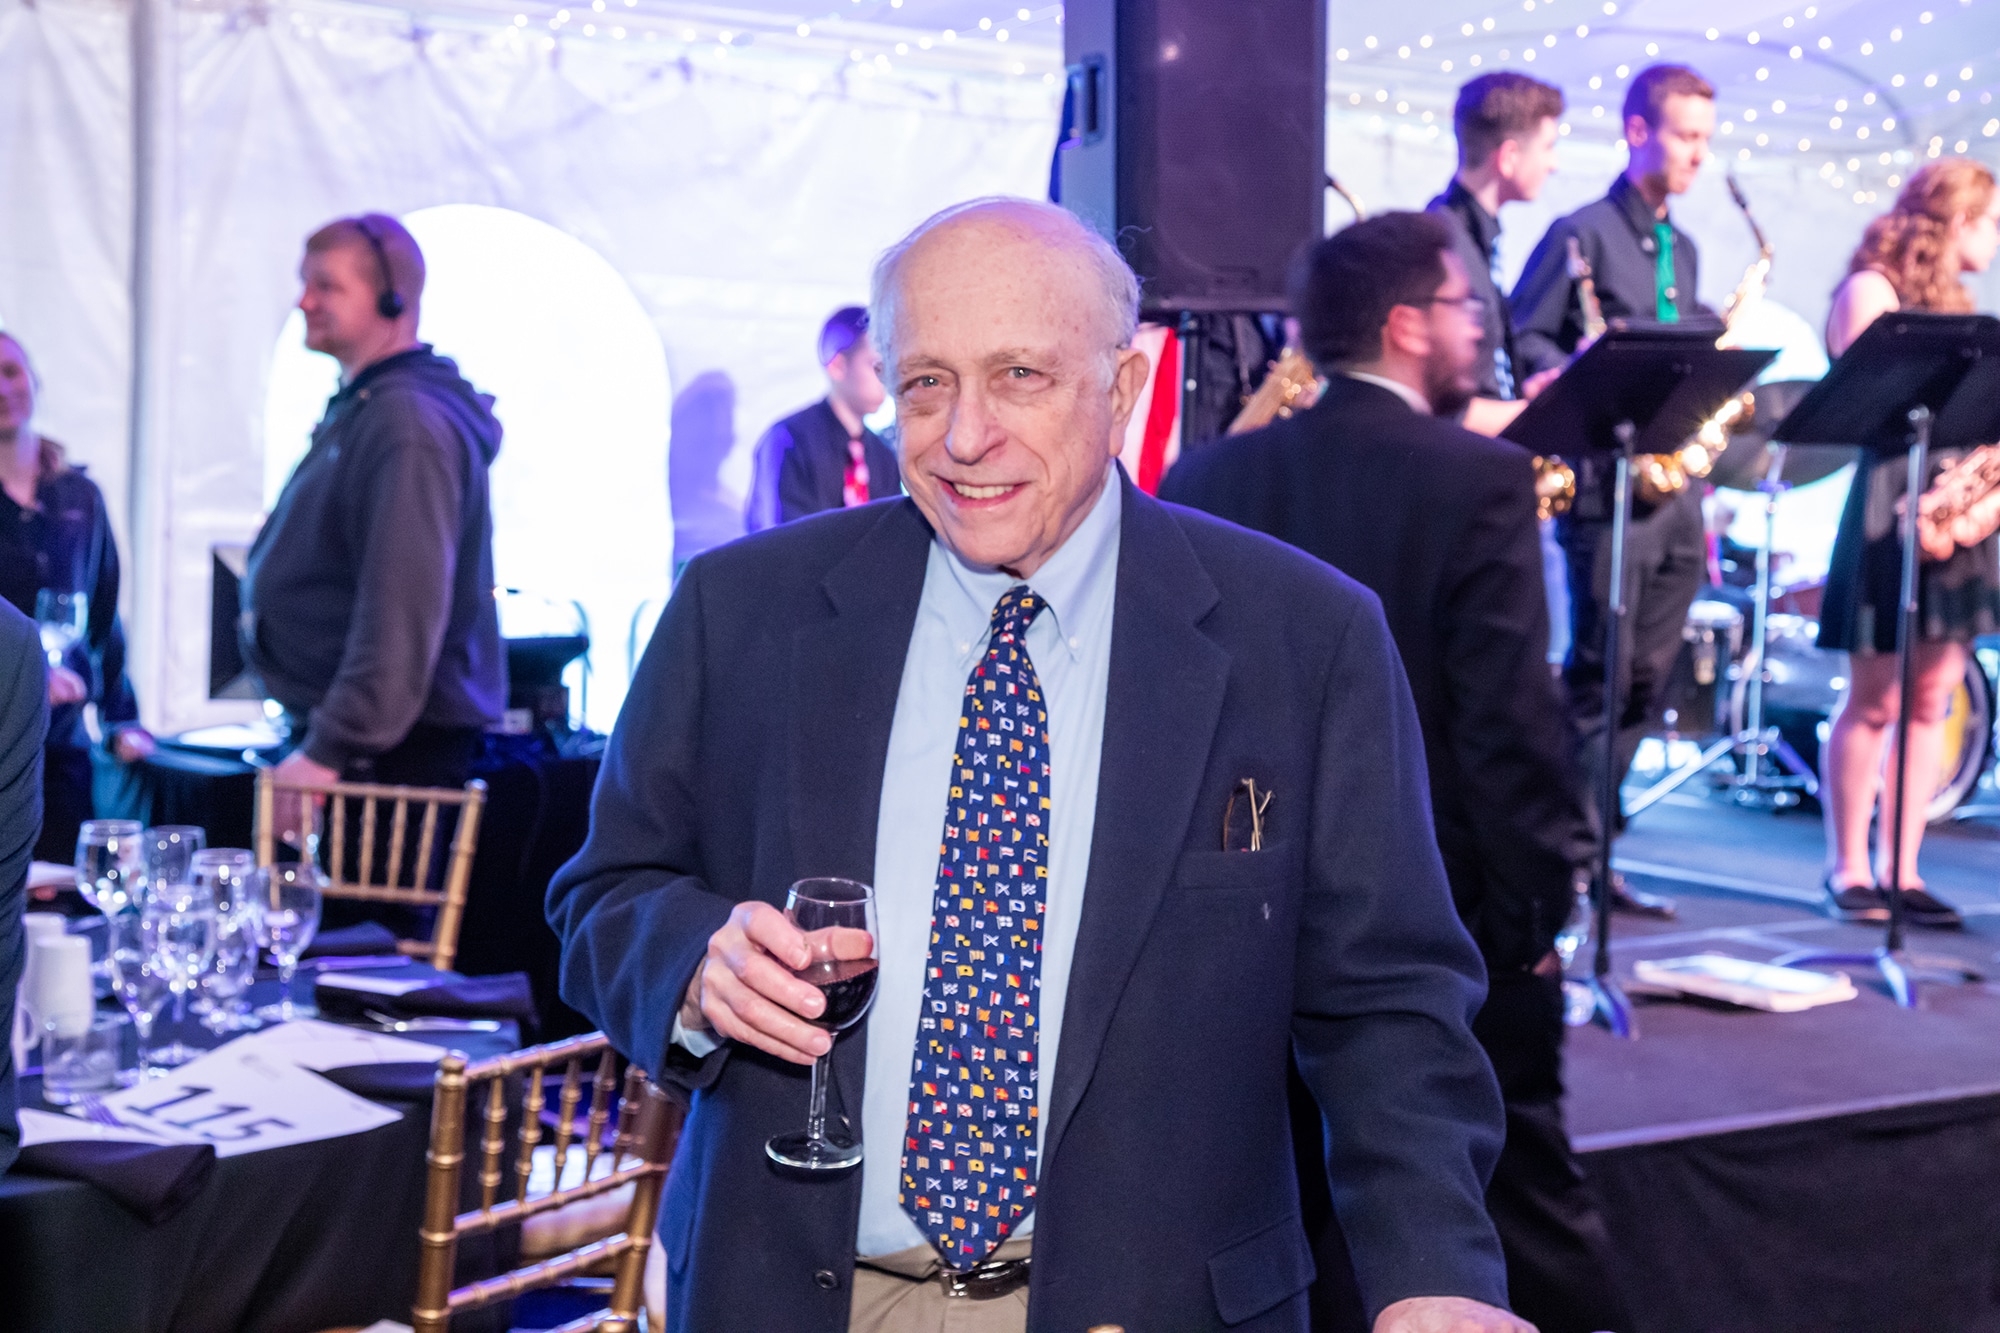 On May 9, 2019, Community Options celebrated its 30th anniversary on the campus of Princeton University at the McCarter Theatre Center Gala Tent.